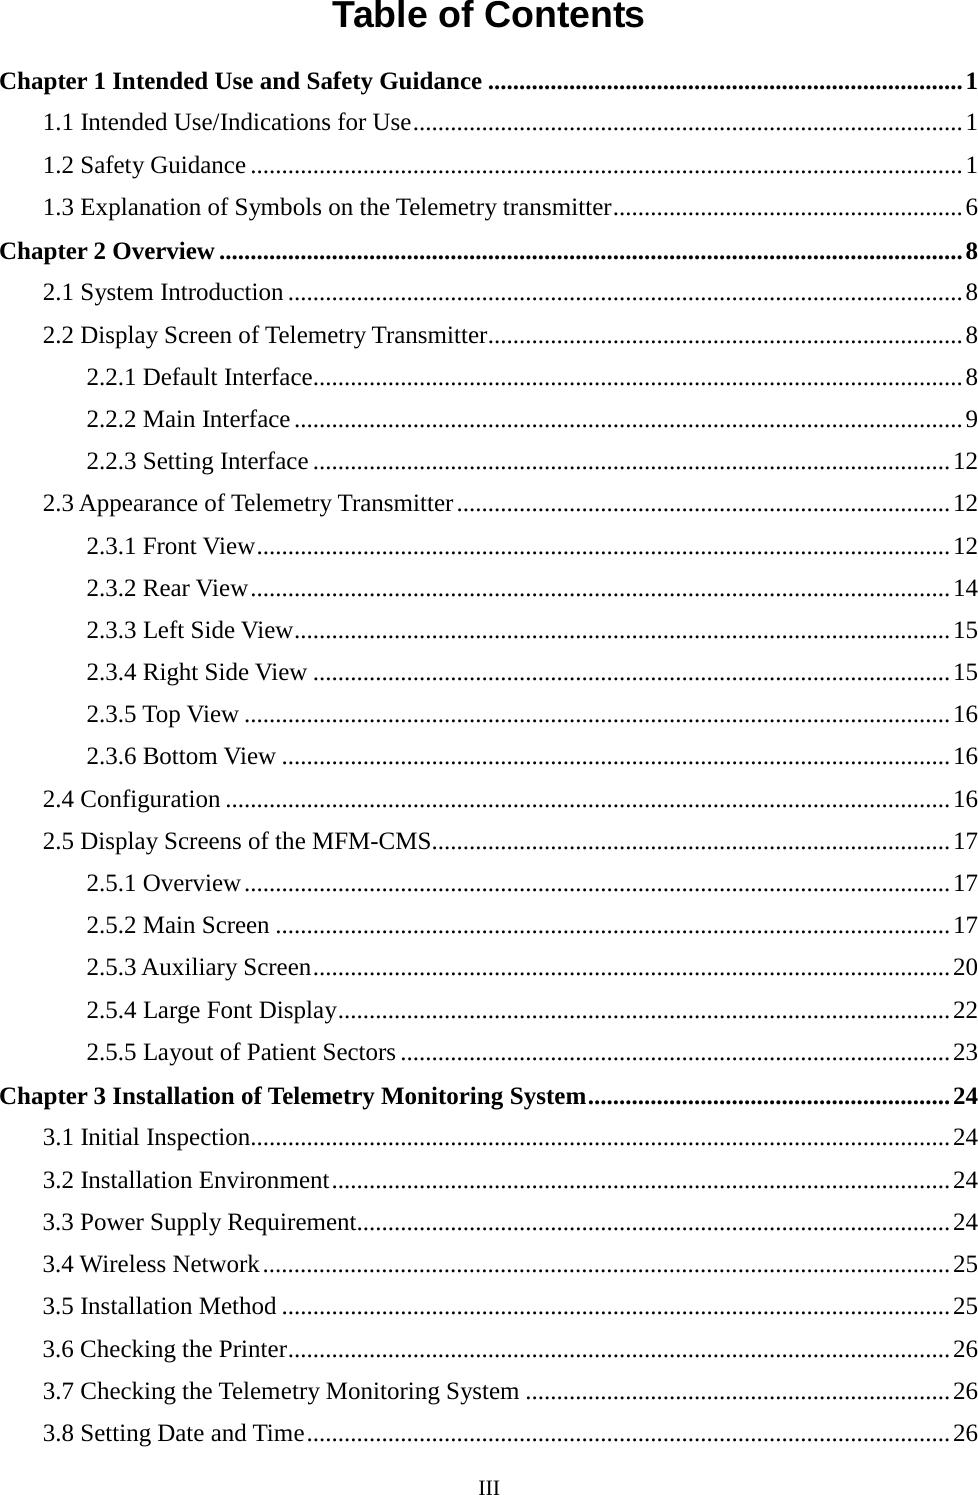  Table of Contents Chapter 1 Intended Use and Safety Guidance ............................................................................ 1 1.1 Intended Use/Indications for Use ........................................................................................ 1 1.2 Safety Guidance .................................................................................................................. 1 1.3 Explanation of Symbols on the Telemetry transmitter ........................................................ 6 Chapter 2 Overview ....................................................................................................................... 8 2.1 System Introduction ............................................................................................................ 8 2.2 Display Screen of Telemetry Transmitter............................................................................ 8 2.2.1 Default Interface........................................................................................................ 8 2.2.2 Main Interface ........................................................................................................... 9 2.2.3 Setting Interface ...................................................................................................... 12 2.3 Appearance of Telemetry Transmitter ............................................................................... 12 2.3.1 Front View ............................................................................................................... 12 2.3.2 Rear View ................................................................................................................ 14 2.3.3 Left Side View ......................................................................................................... 15 2.3.4 Right Side View ...................................................................................................... 15 2.3.5 Top View ................................................................................................................. 16 2.3.6 Bottom View ........................................................................................................... 16 2.4 Configuration .................................................................................................................... 16 2.5 Display Screens of the MFM-CMS................................................................................... 17 2.5.1 Overview ................................................................................................................. 17 2.5.2 Main Screen ............................................................................................................ 17 2.5.3 Auxiliary Screen ...................................................................................................... 20 2.5.4 Large Font Display .................................................................................................. 22 2.5.5 Layout of Patient Sectors ........................................................................................ 23 Chapter 3 Installation of Telemetry Monitoring System .......................................................... 24 3.1 Initial Inspection................................................................................................................ 24 3.2 Installation Environment ................................................................................................... 24 3.3 Power Supply Requirement............................................................................................... 24 3.4 Wireless Network .............................................................................................................. 25 3.5 Installation Method ........................................................................................................... 25 3.6 Checking the Printer .......................................................................................................... 26 3.7 Checking the Telemetry Monitoring System .................................................................... 26 3.8 Setting Date and Time ....................................................................................................... 26 III  